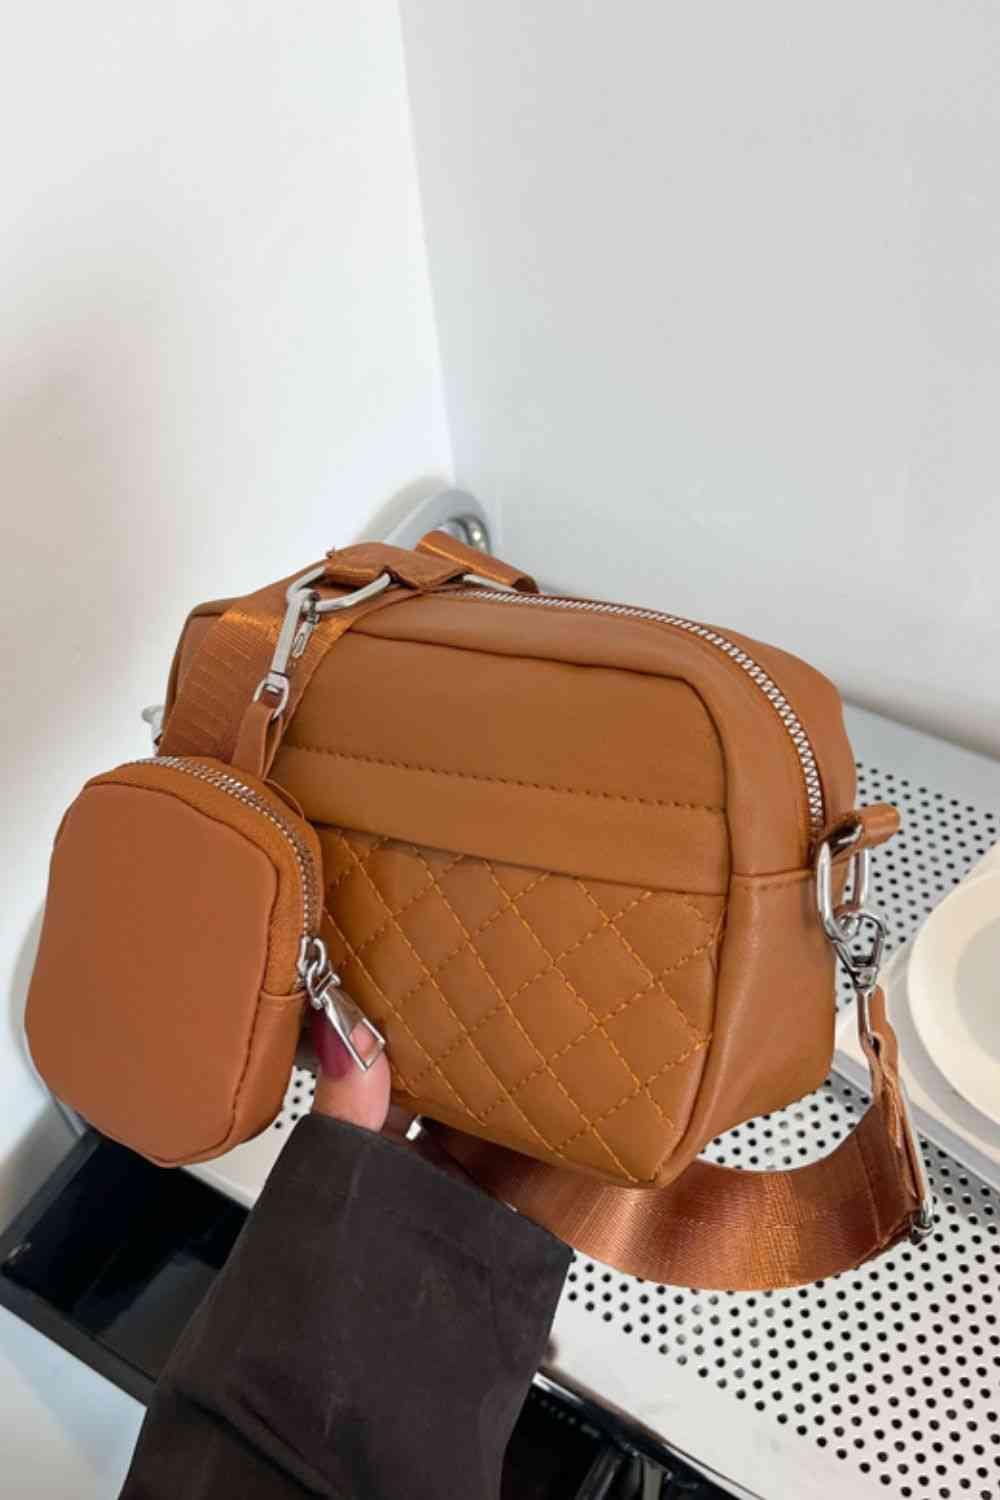 Adored Quilted Stitching Vegan Leather Crossbody Bag with Small Purse Caramel / One Size